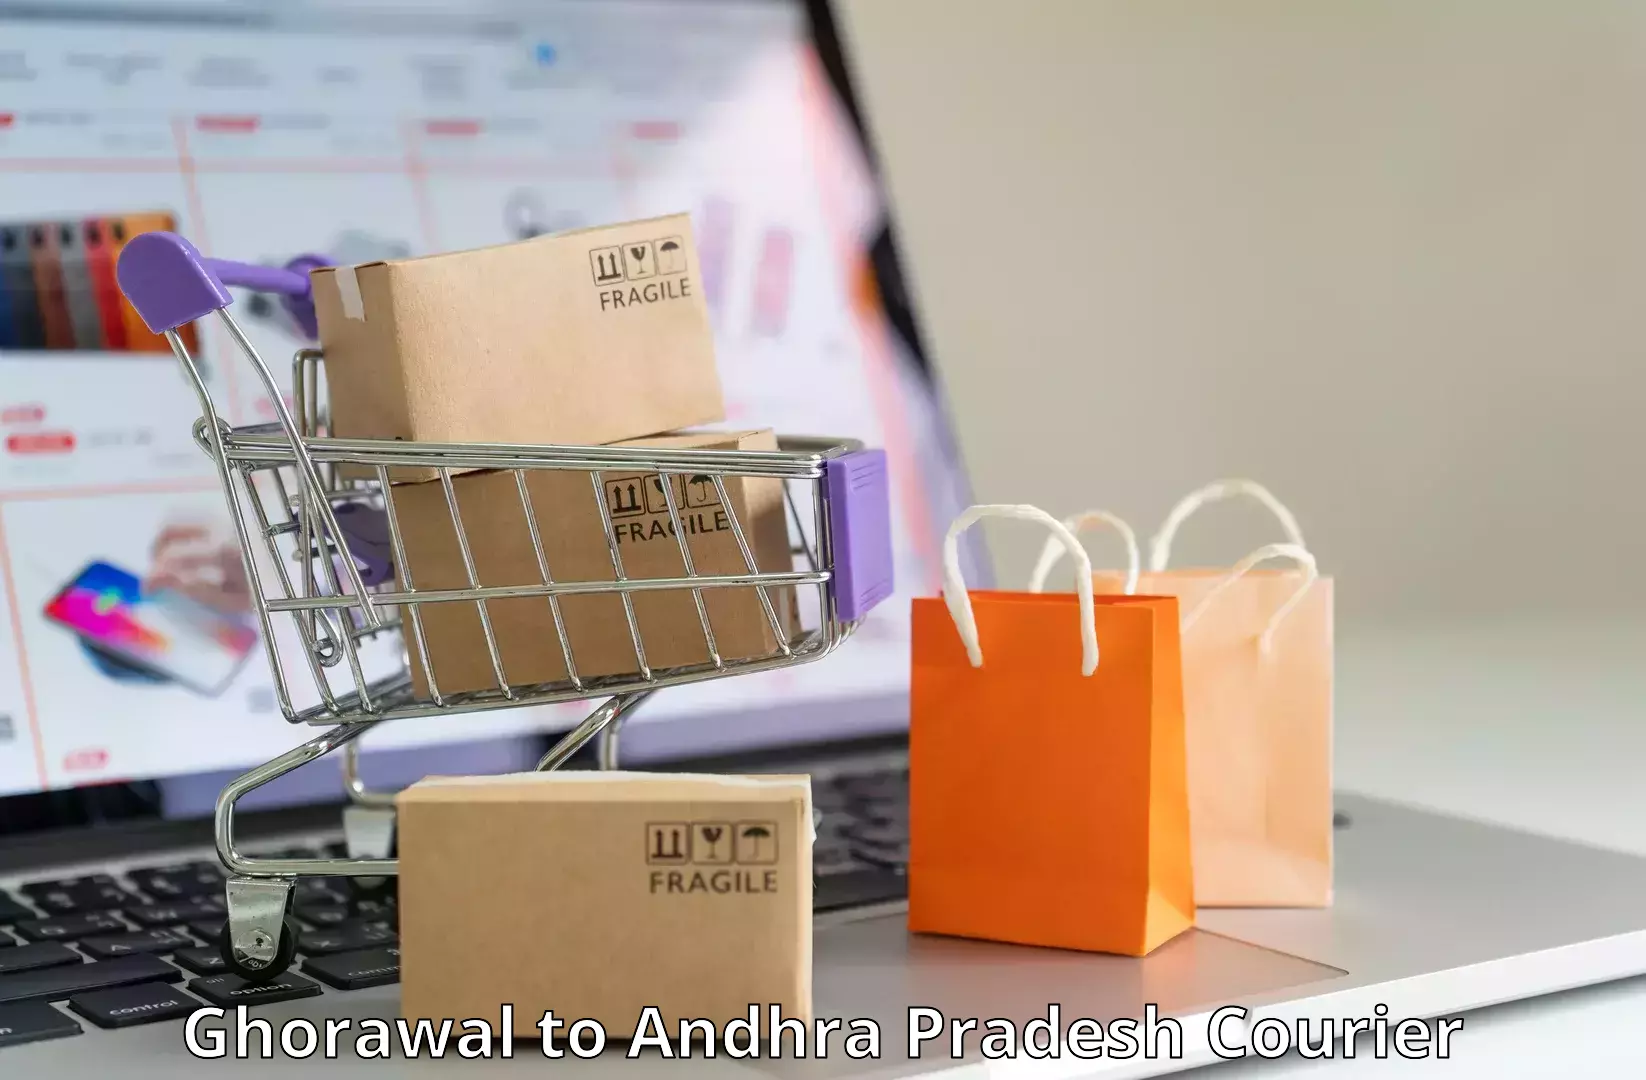 State-of-the-art courier technology Ghorawal to Guntakal